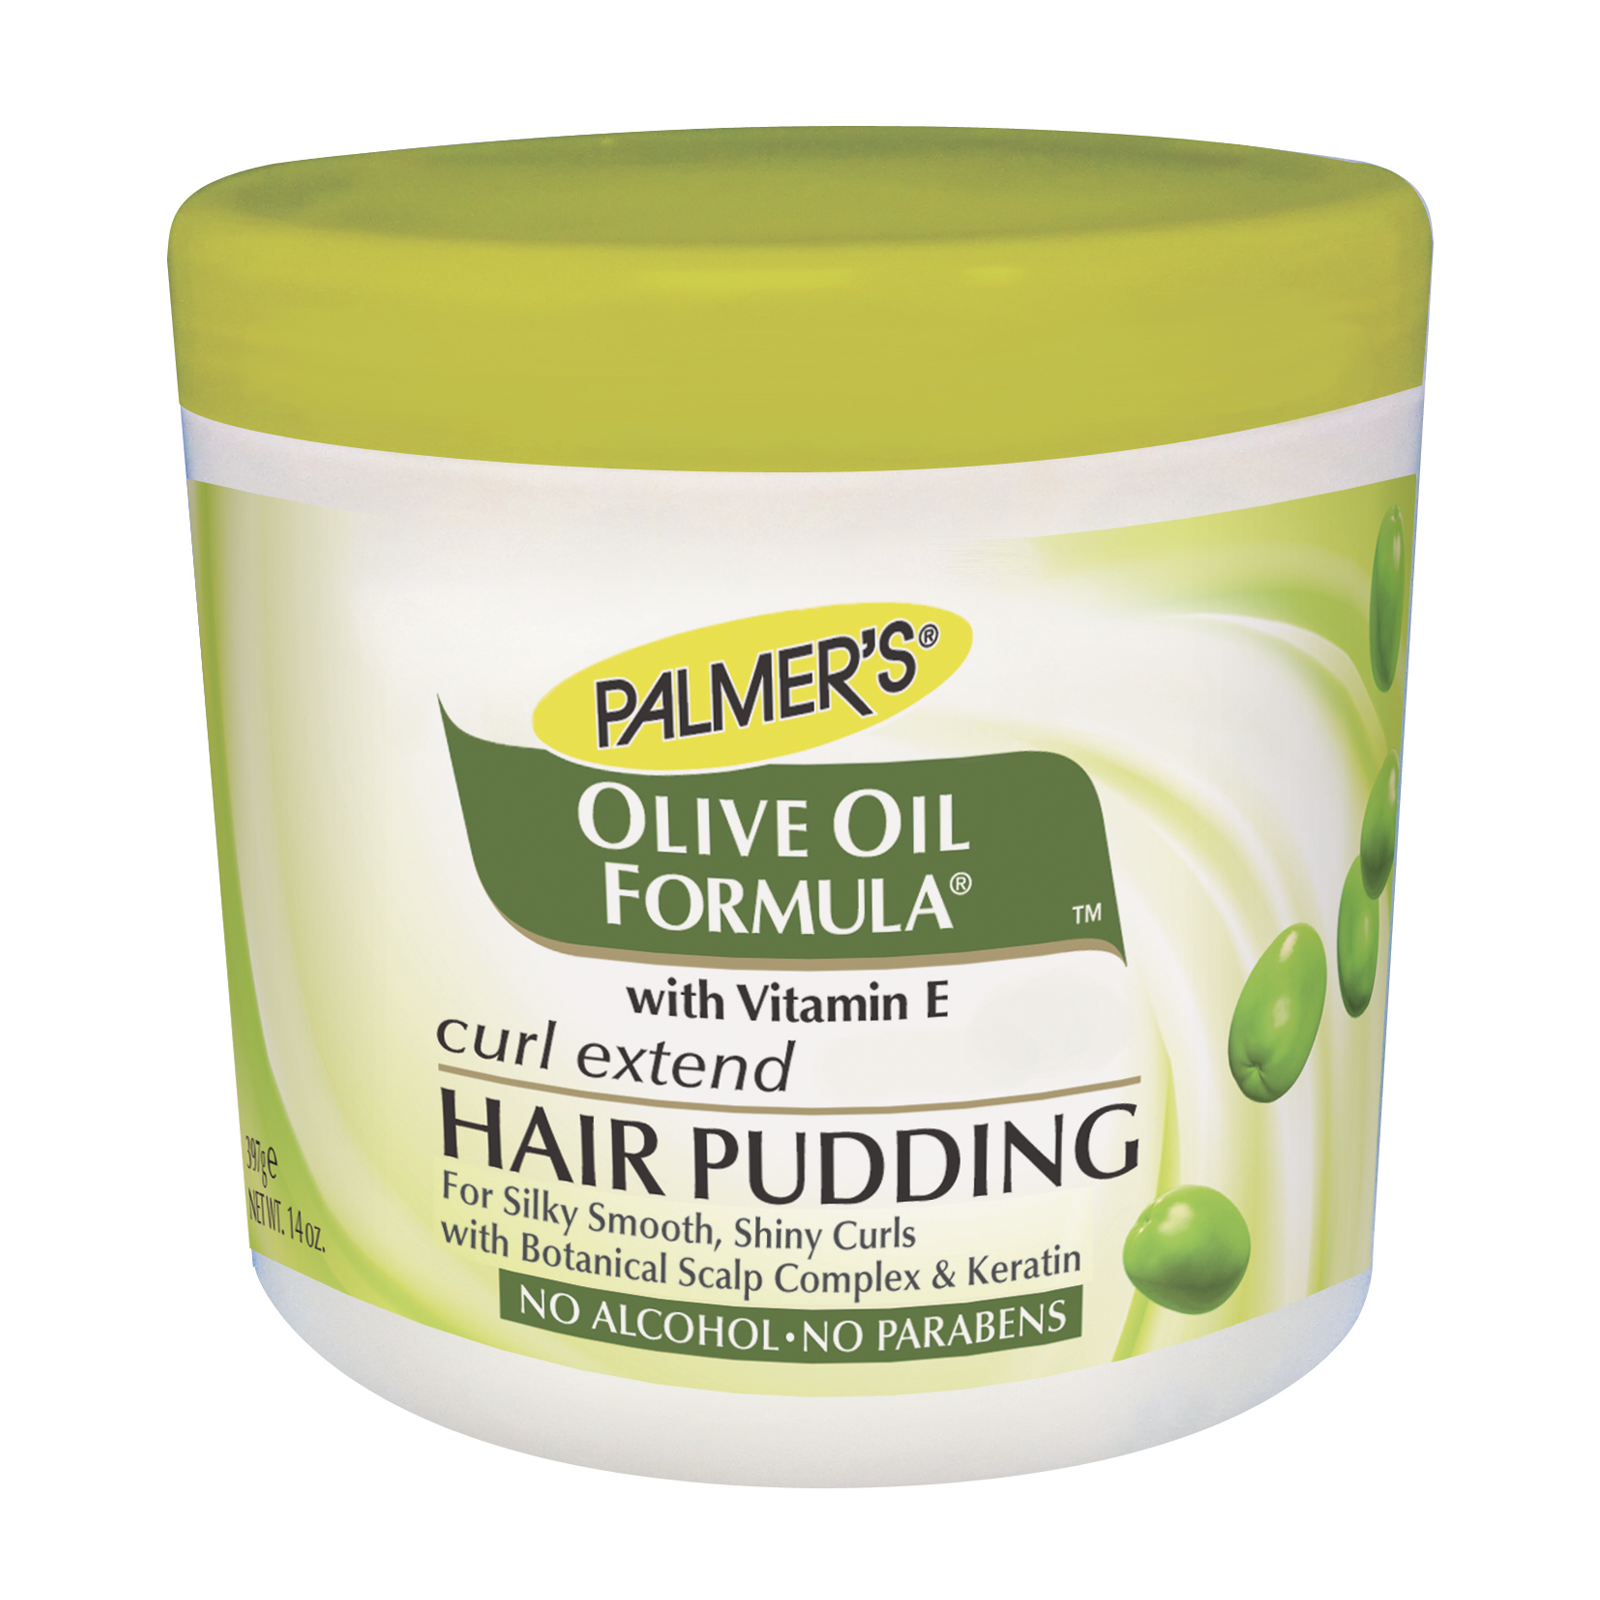 Palmers Olive Oil Formula Curl Extend Hair Pudding 397g